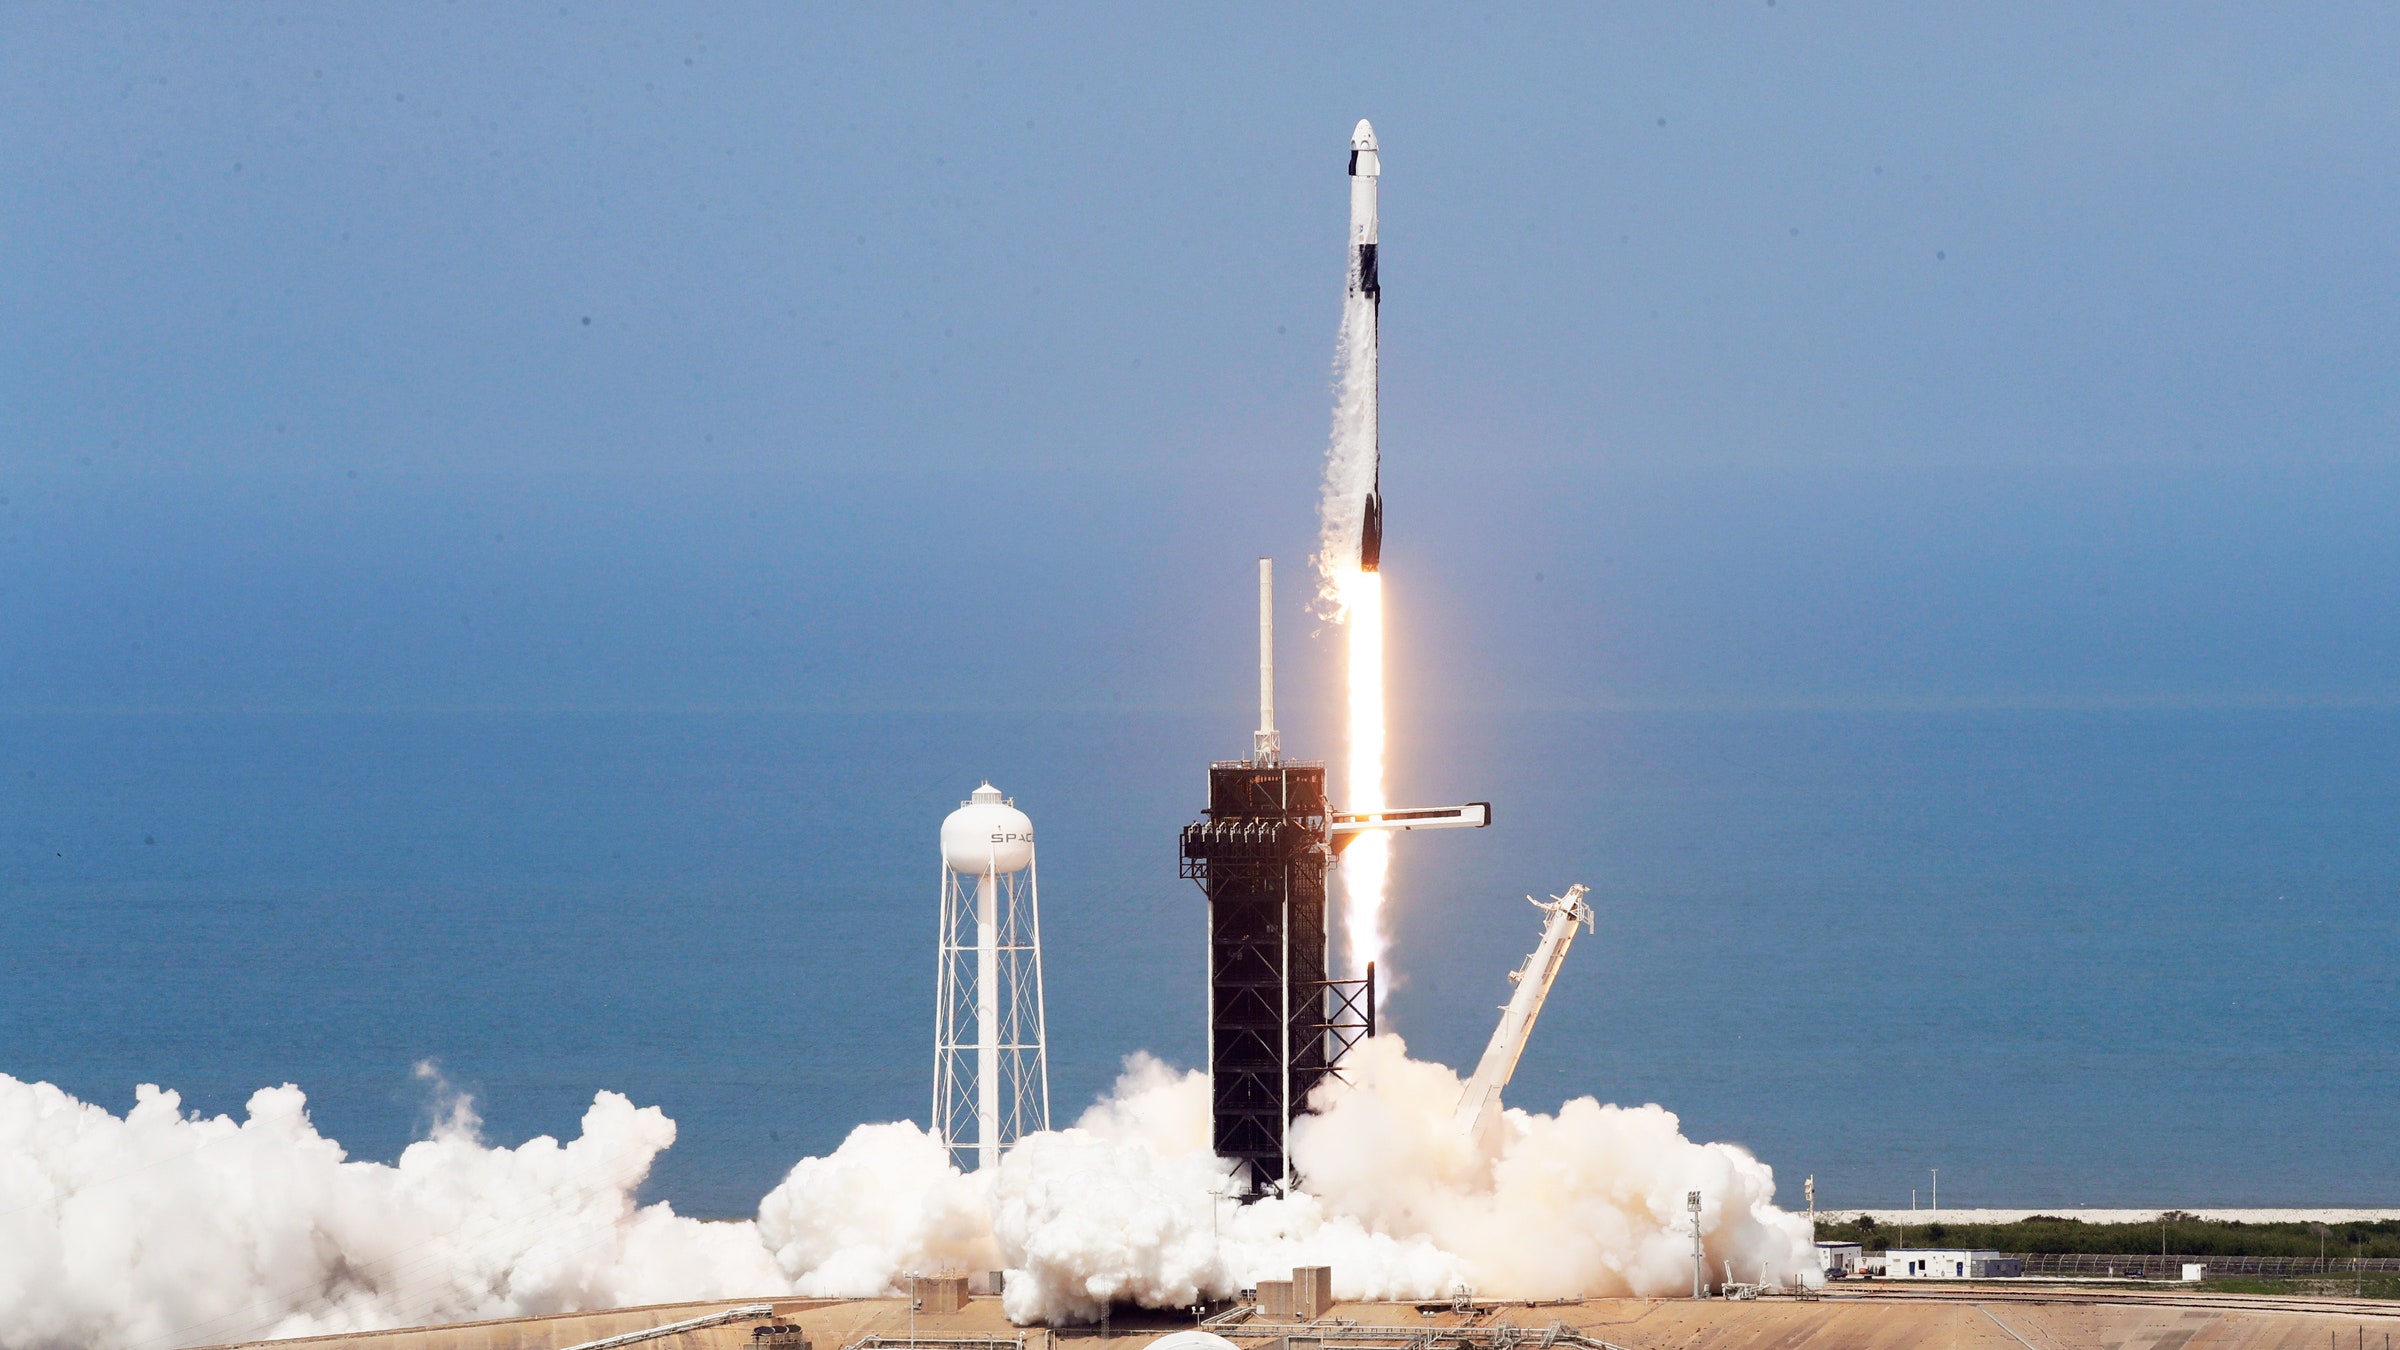 Spacex Launched Two Astronauts Changing Spaceflight Forever Wired